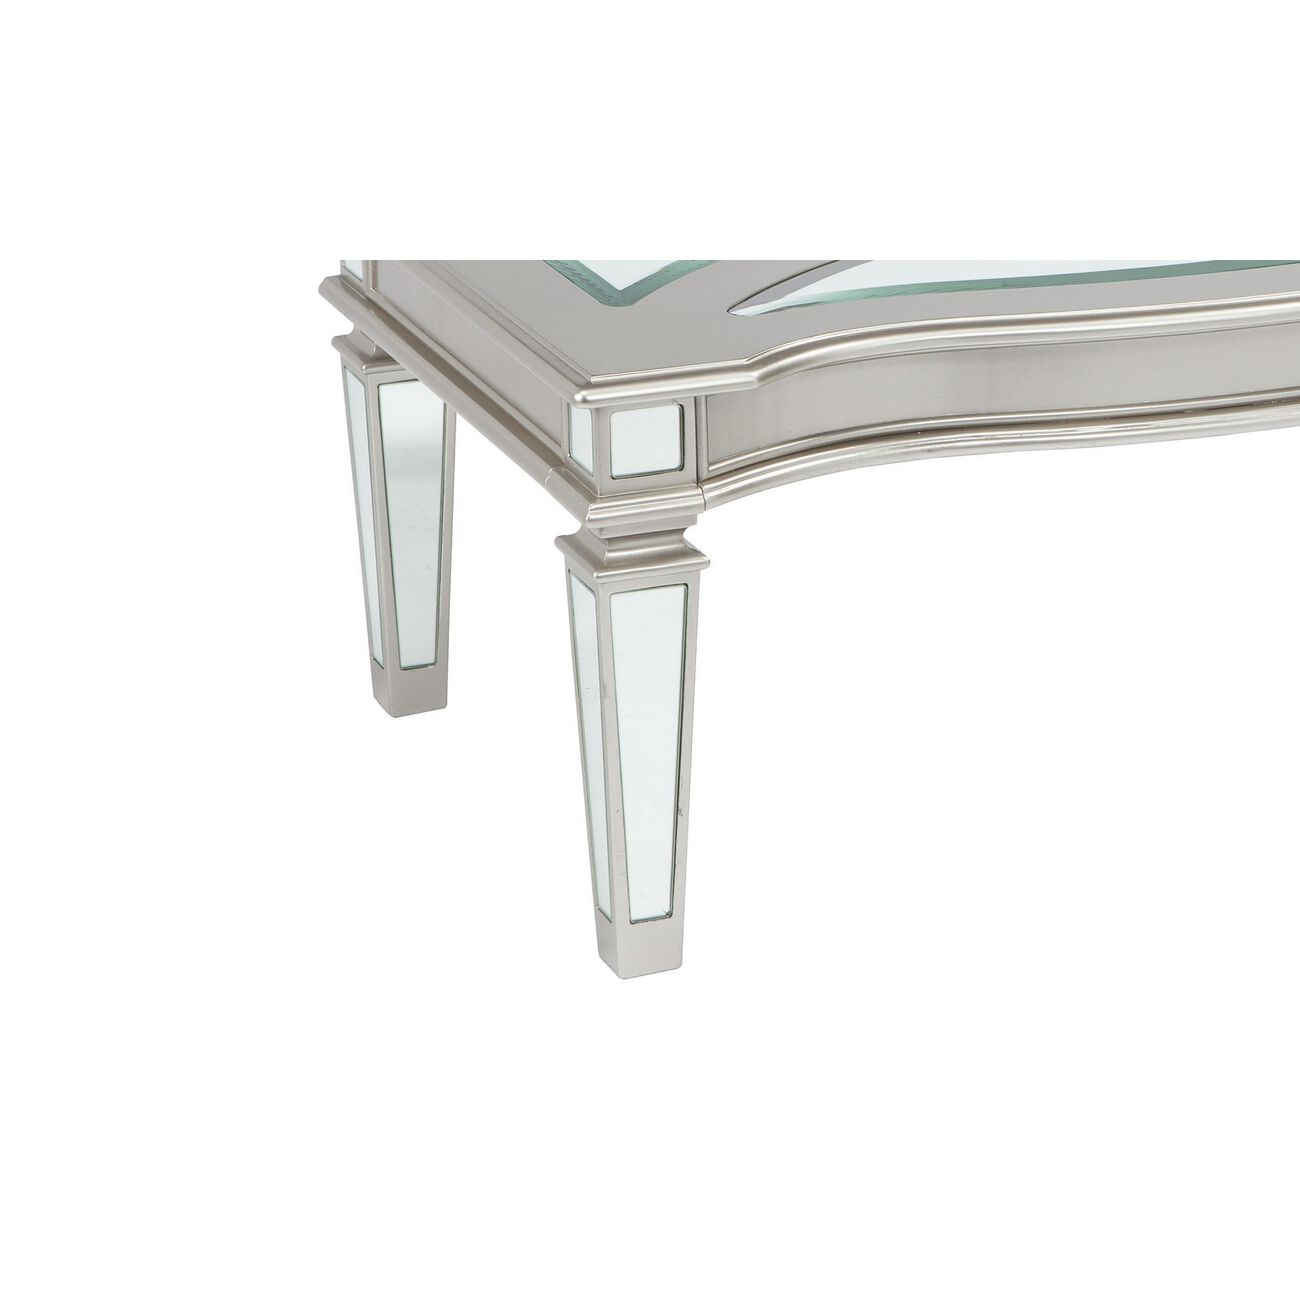 Rectangular Wooden Cocktail Table with Mirror Inserts, Silver